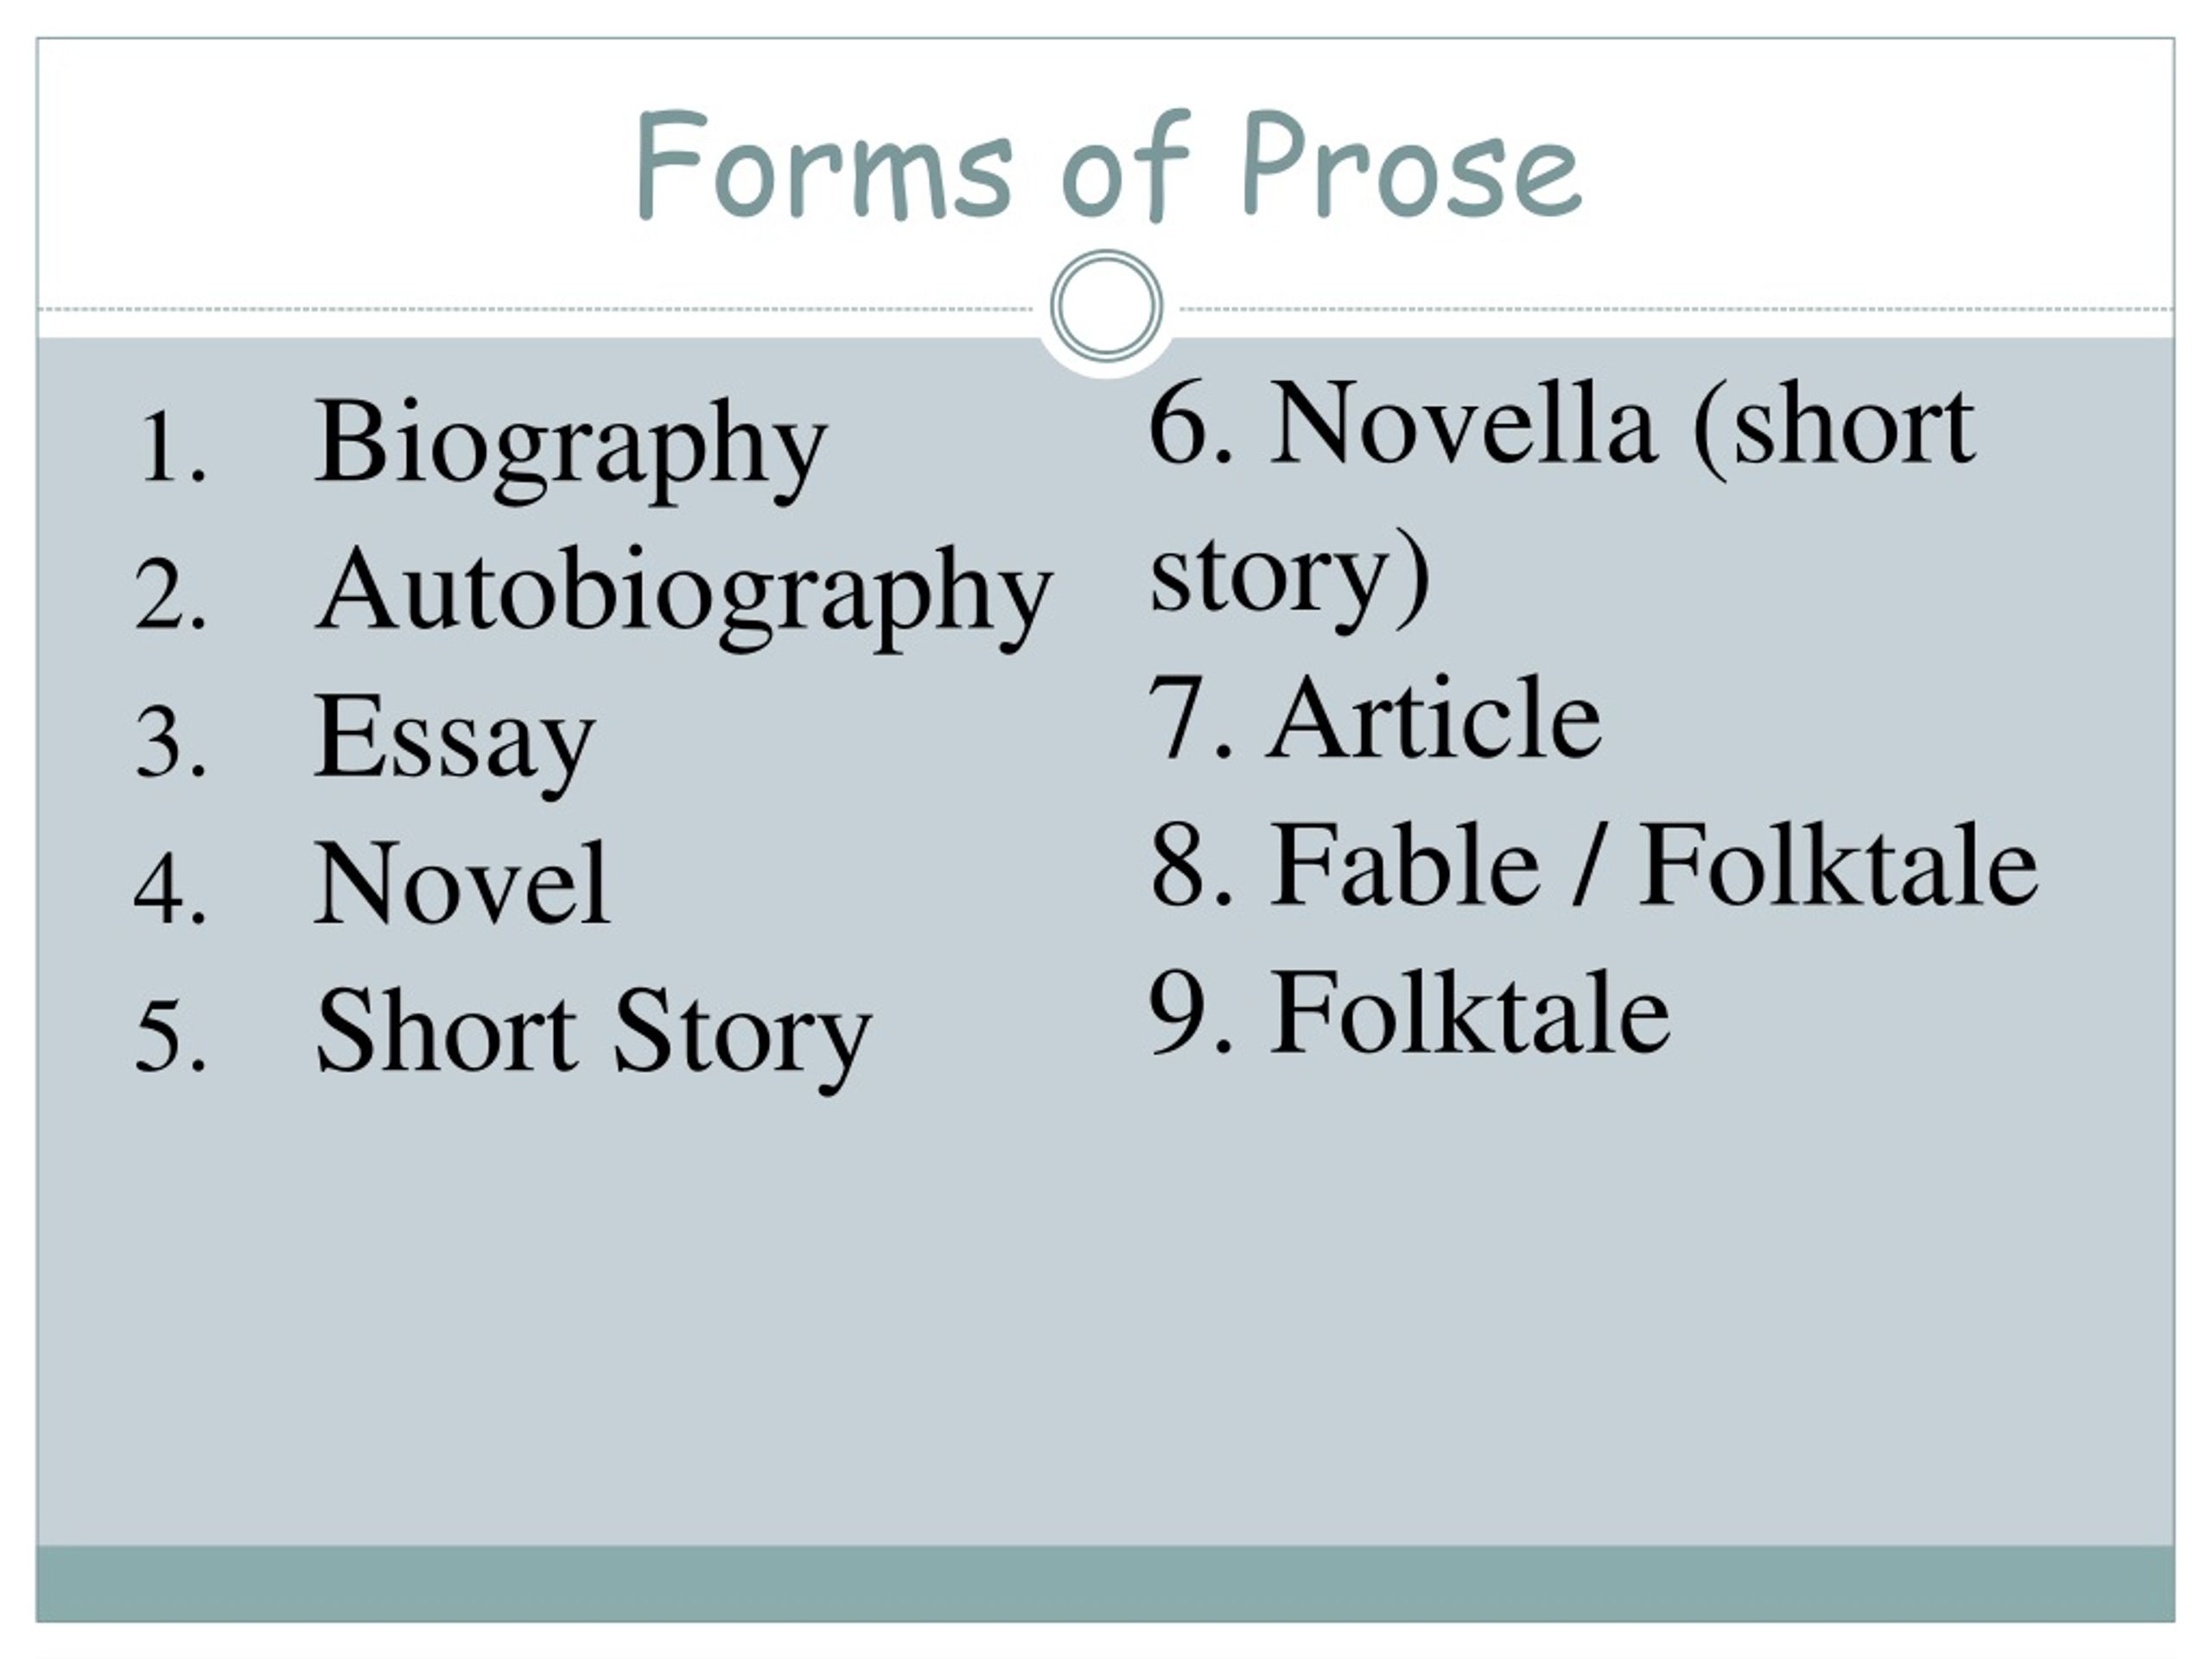 short stories novels and essays are all forms of prose